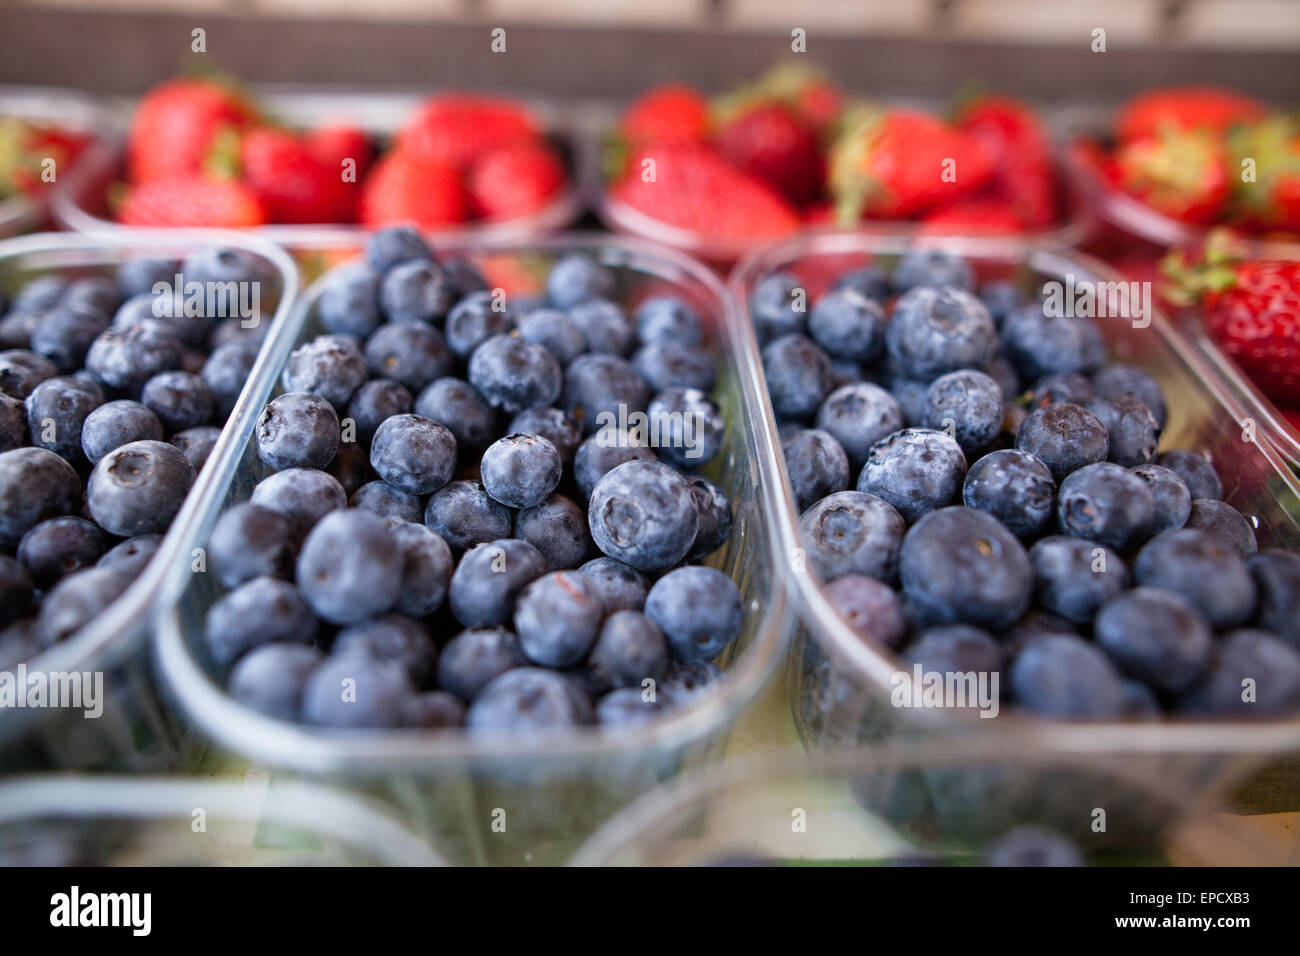 Delicious, ripe and fresh blueberries and strawberries Stock Photo